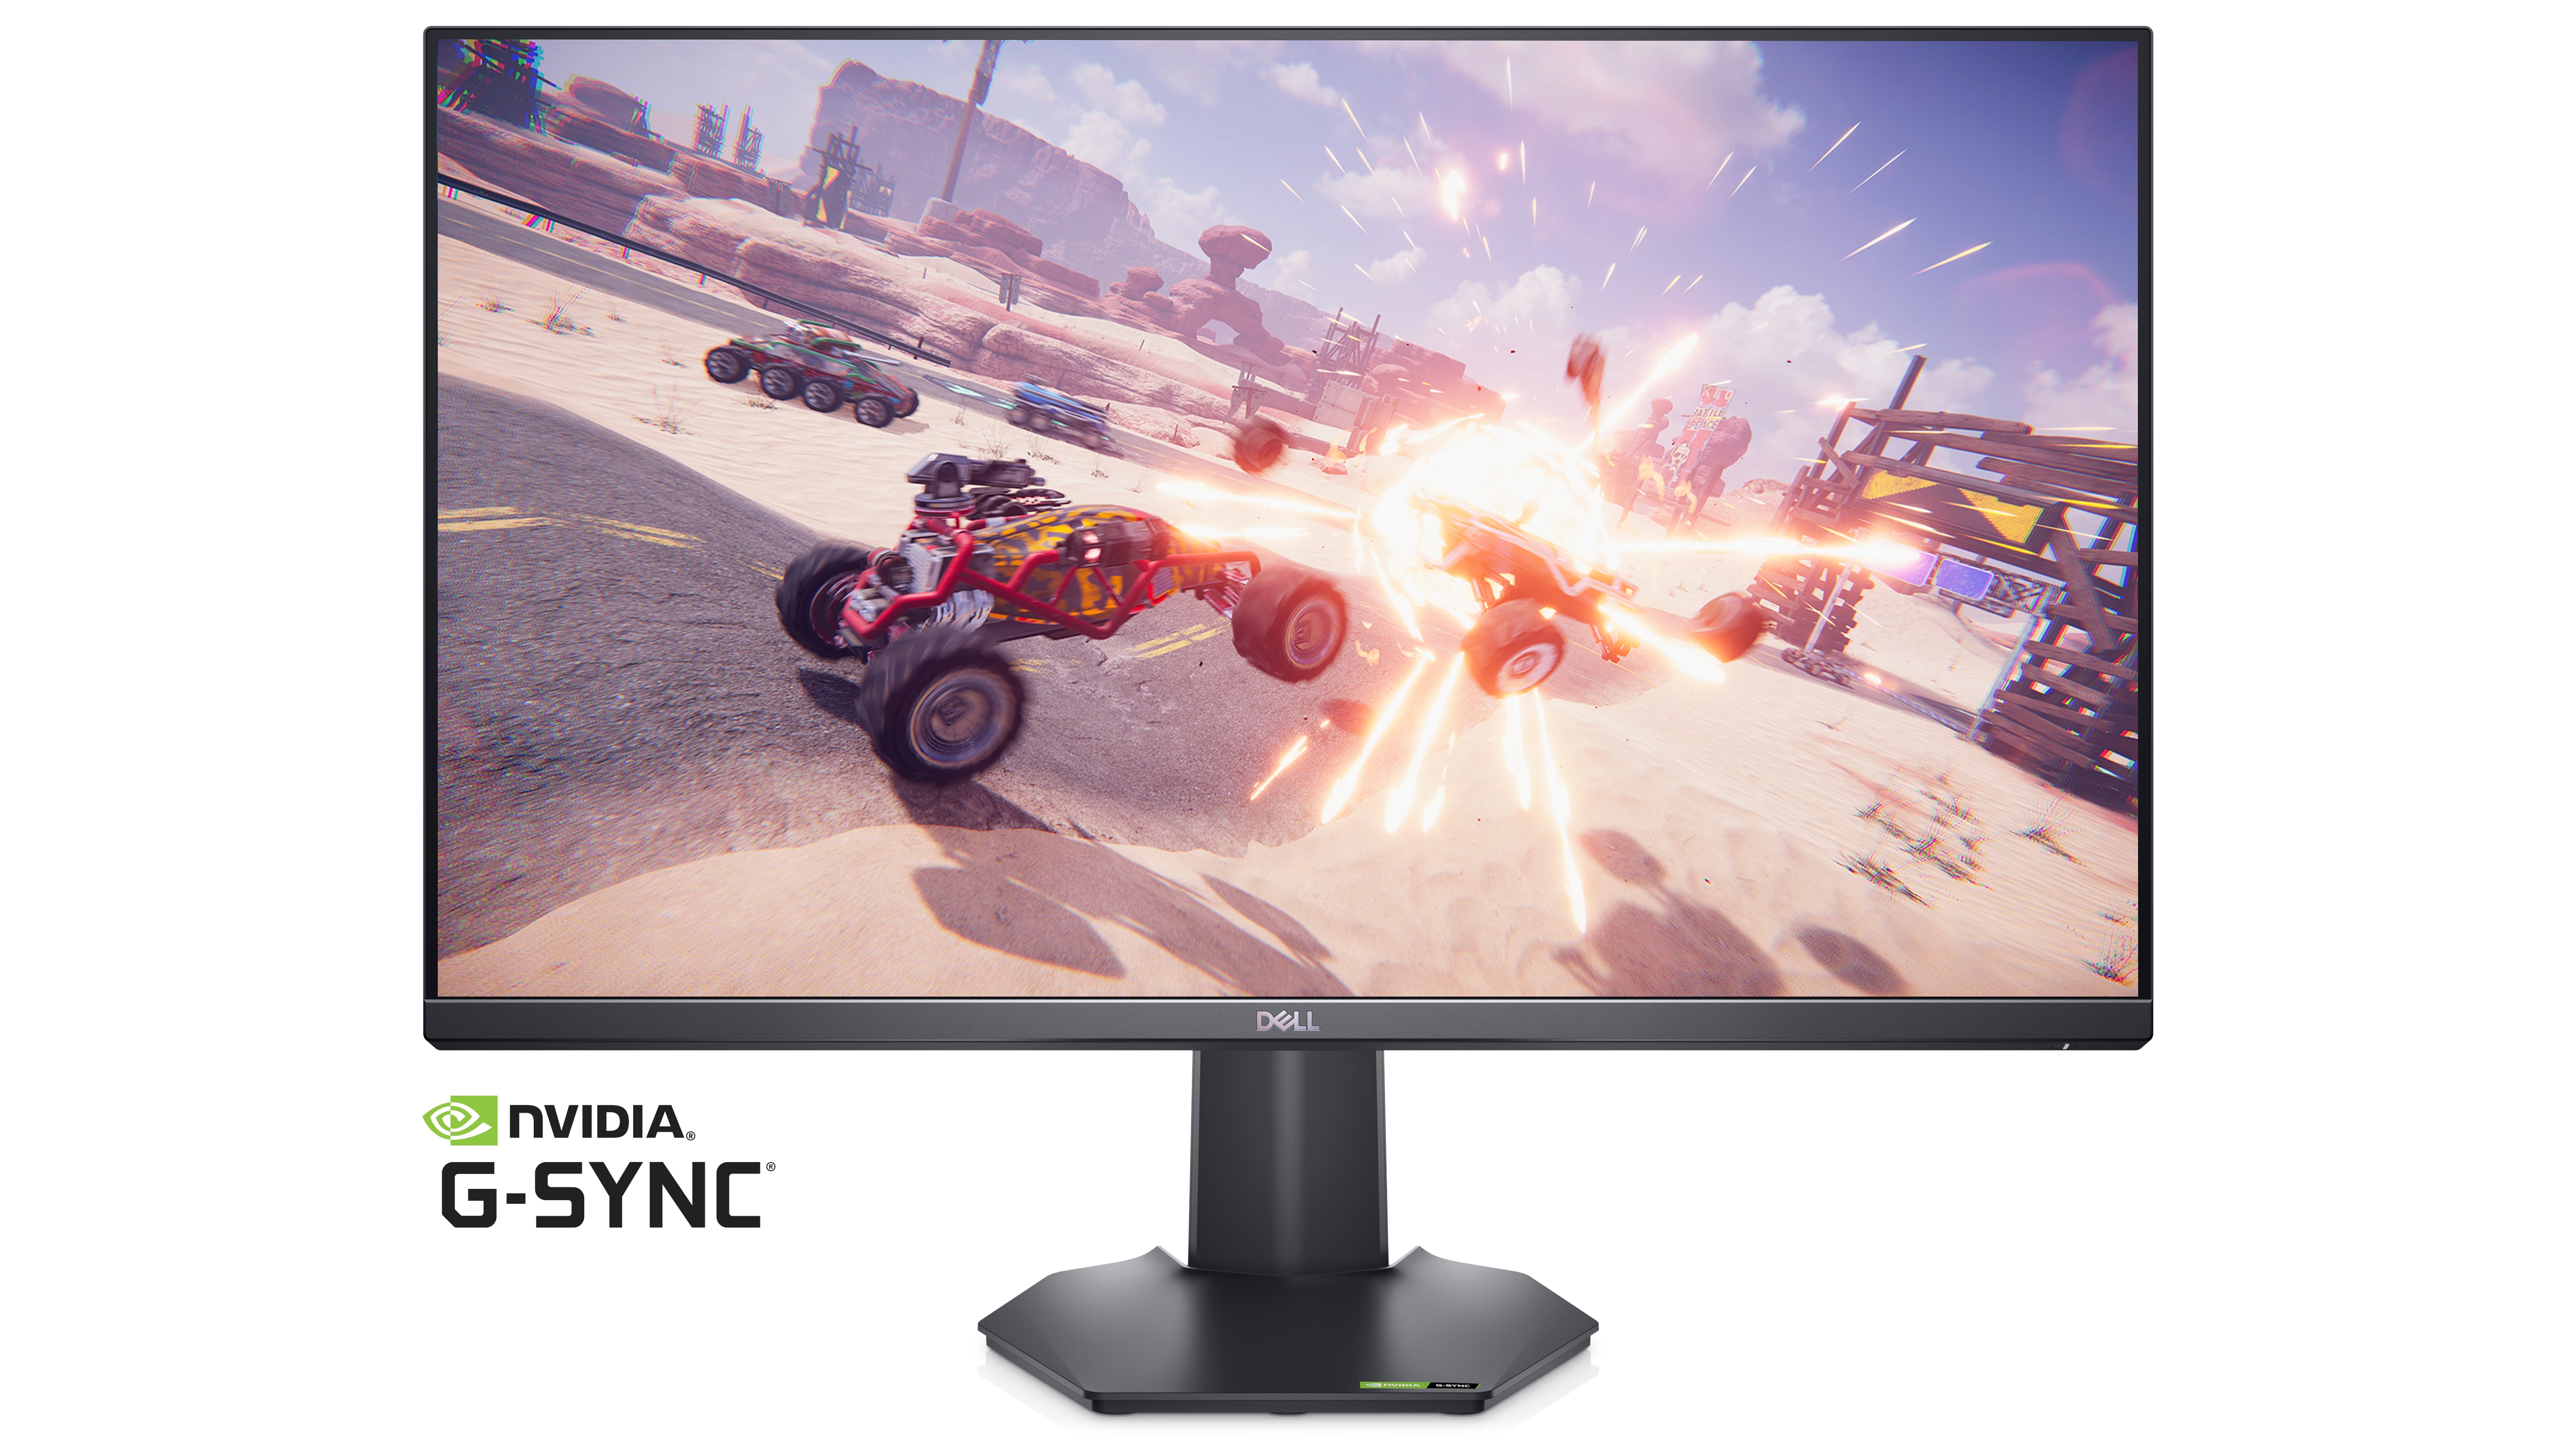 Picture of Dell G2722HS Gaming Monitor with a game image on the screen and a Nvidia G-Sync logo below the product.